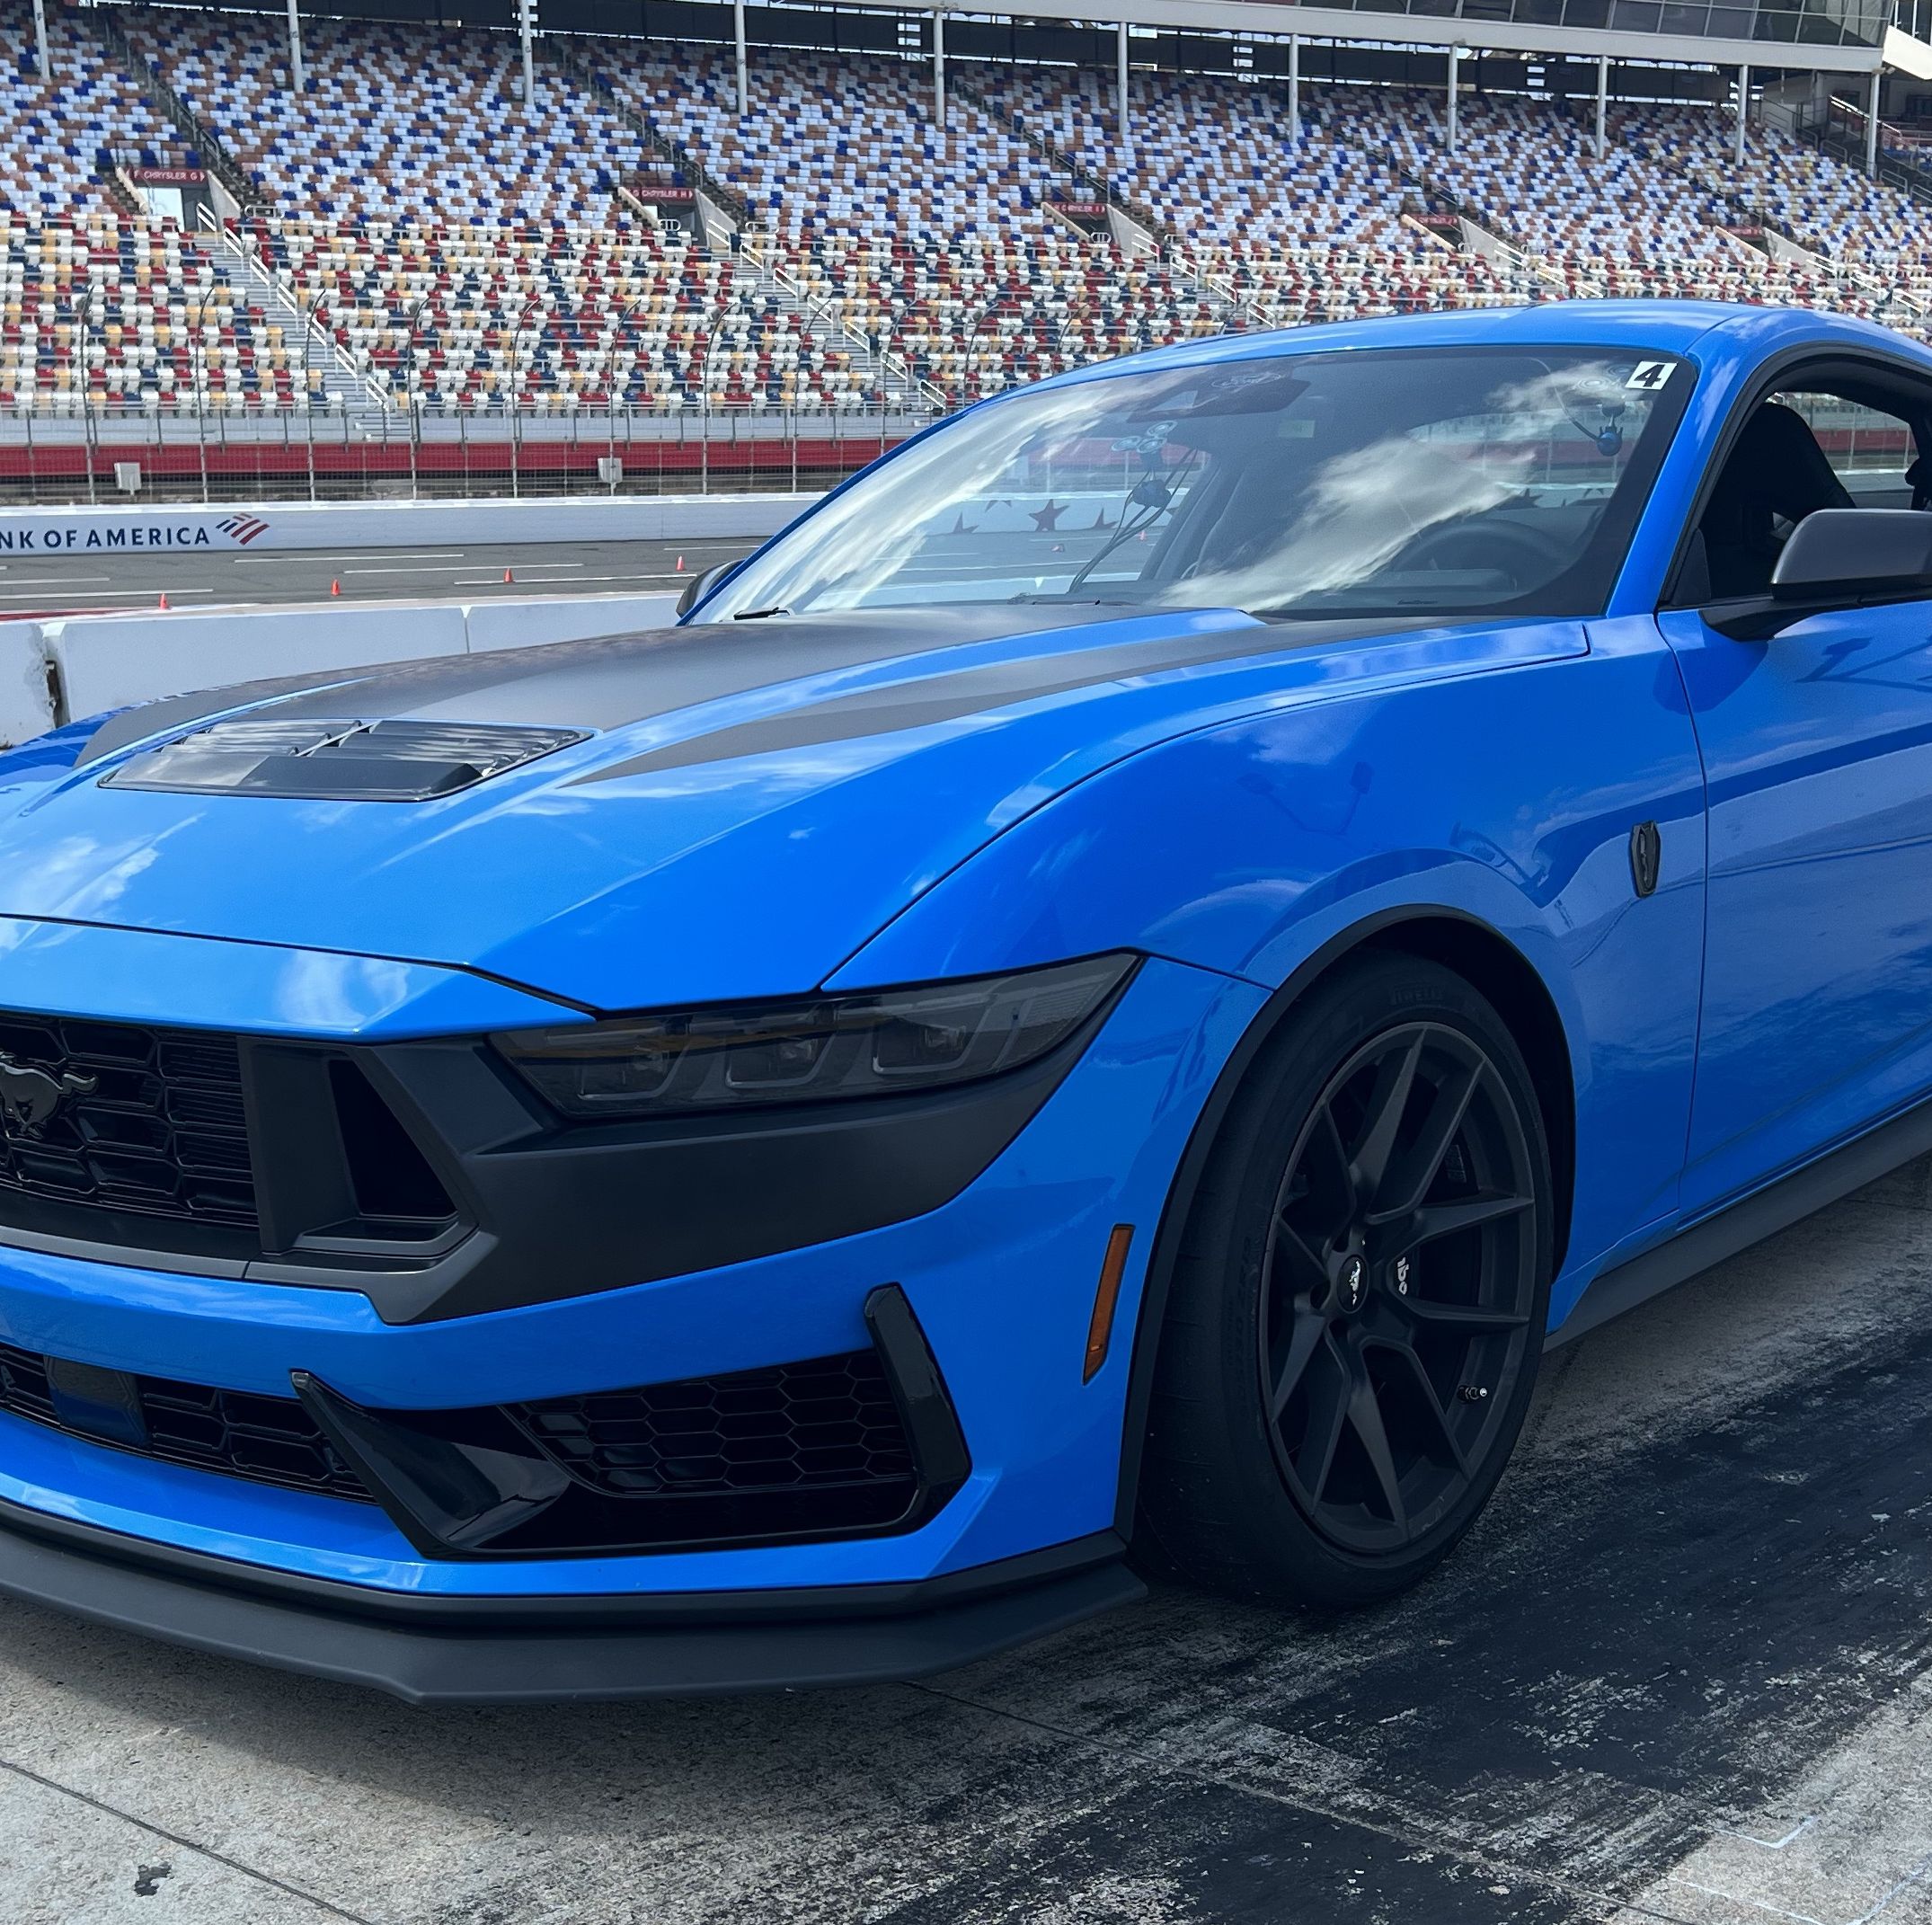 Review: The 2024 Ford Mustang Dark Horse Is the Ultimate 5.0